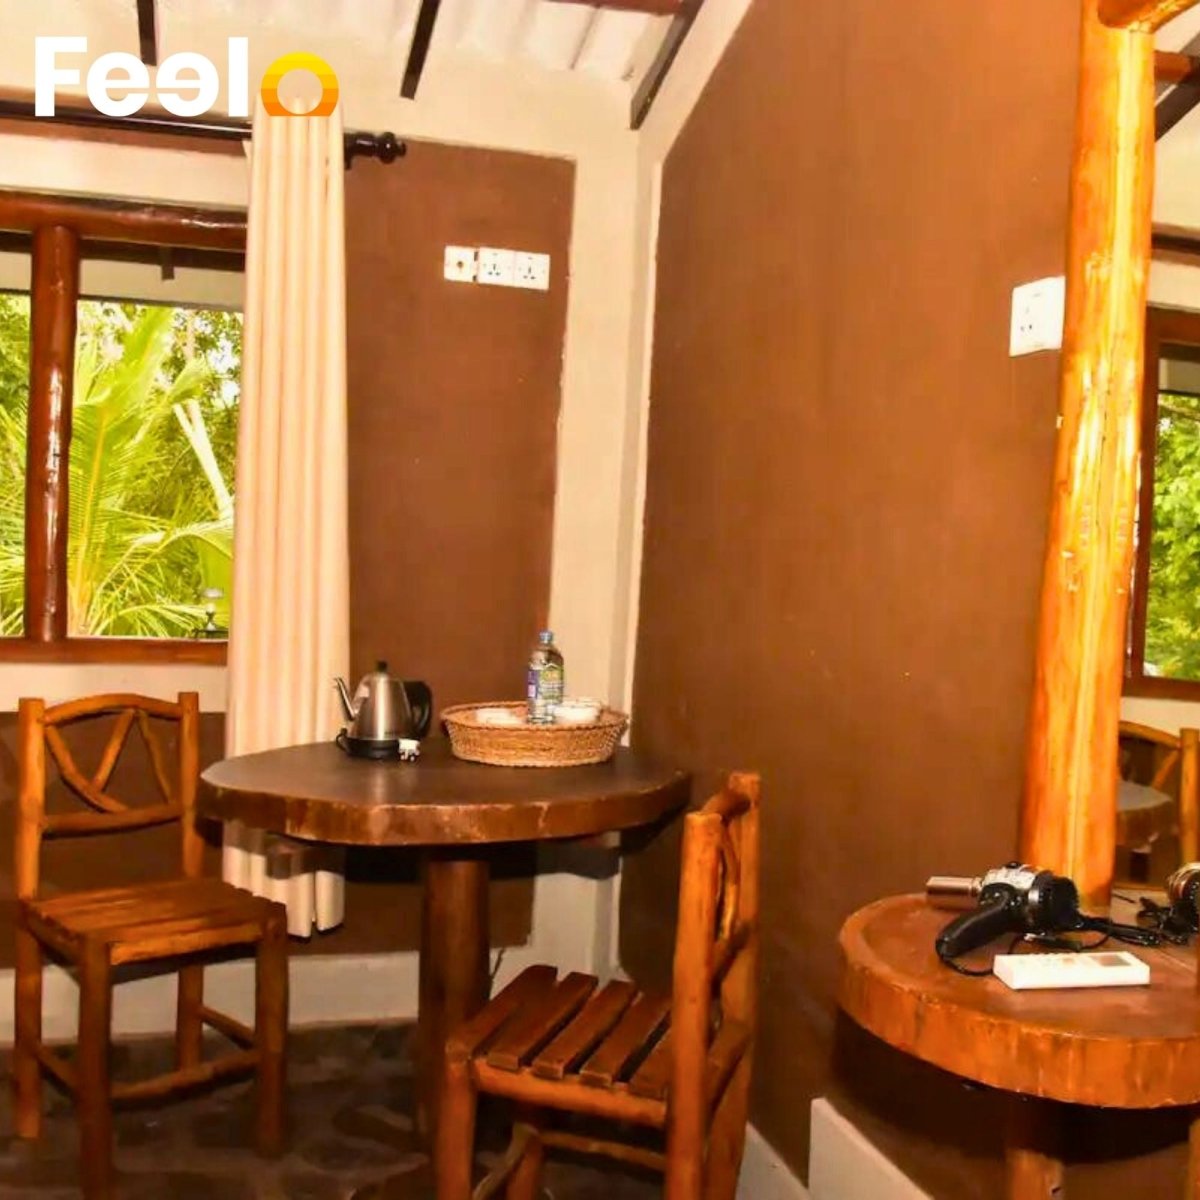 1x Night or 2x Nights stay in luxurious chalets by the Walawe River - Freedom Eco Resort, Udawalawa | Feelo